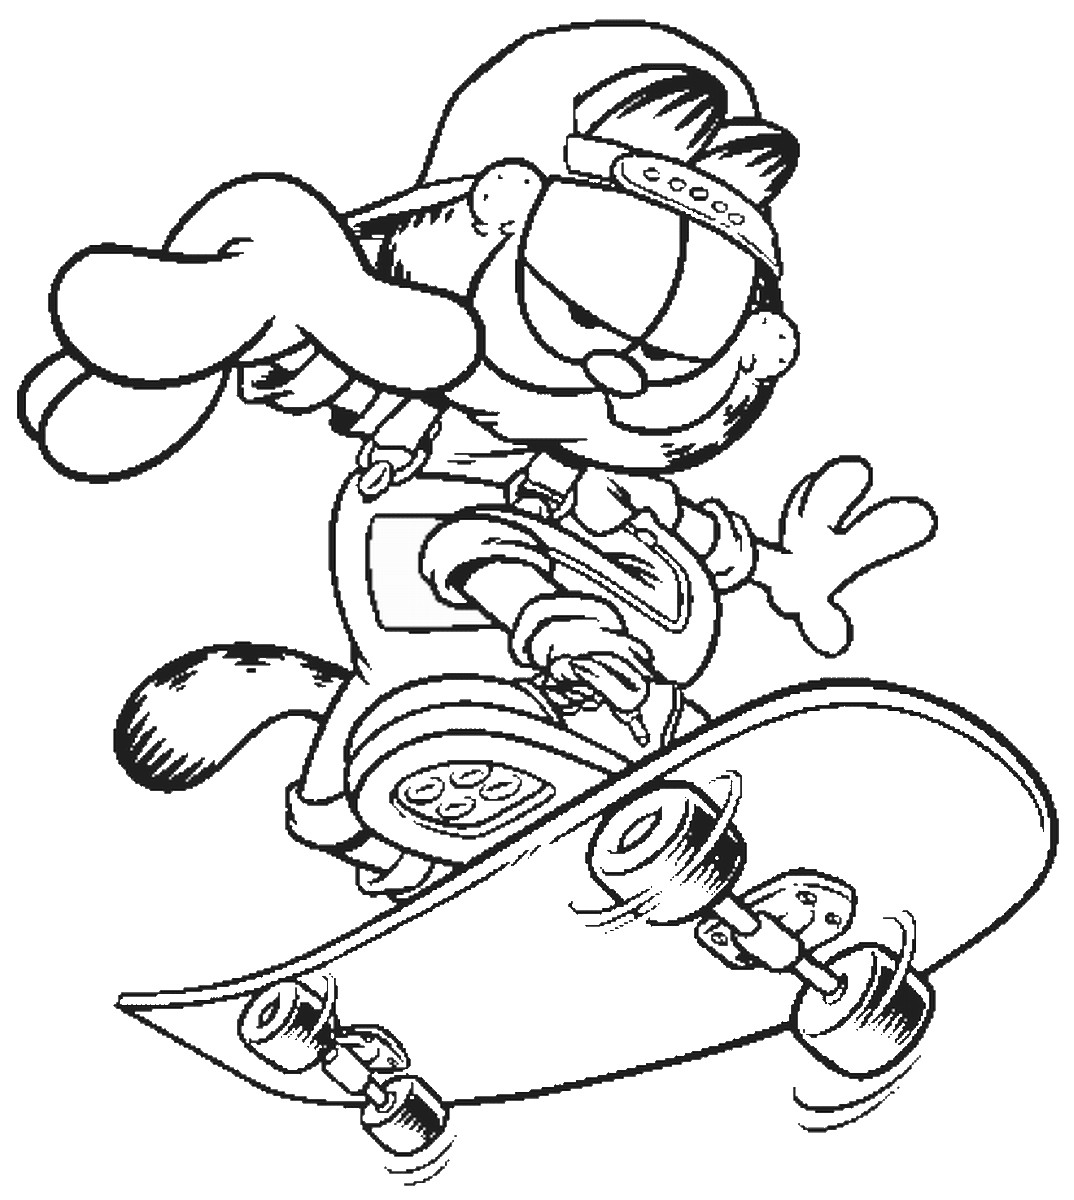 Coloring Pages To Color Online
 Garfield Coloring Pages